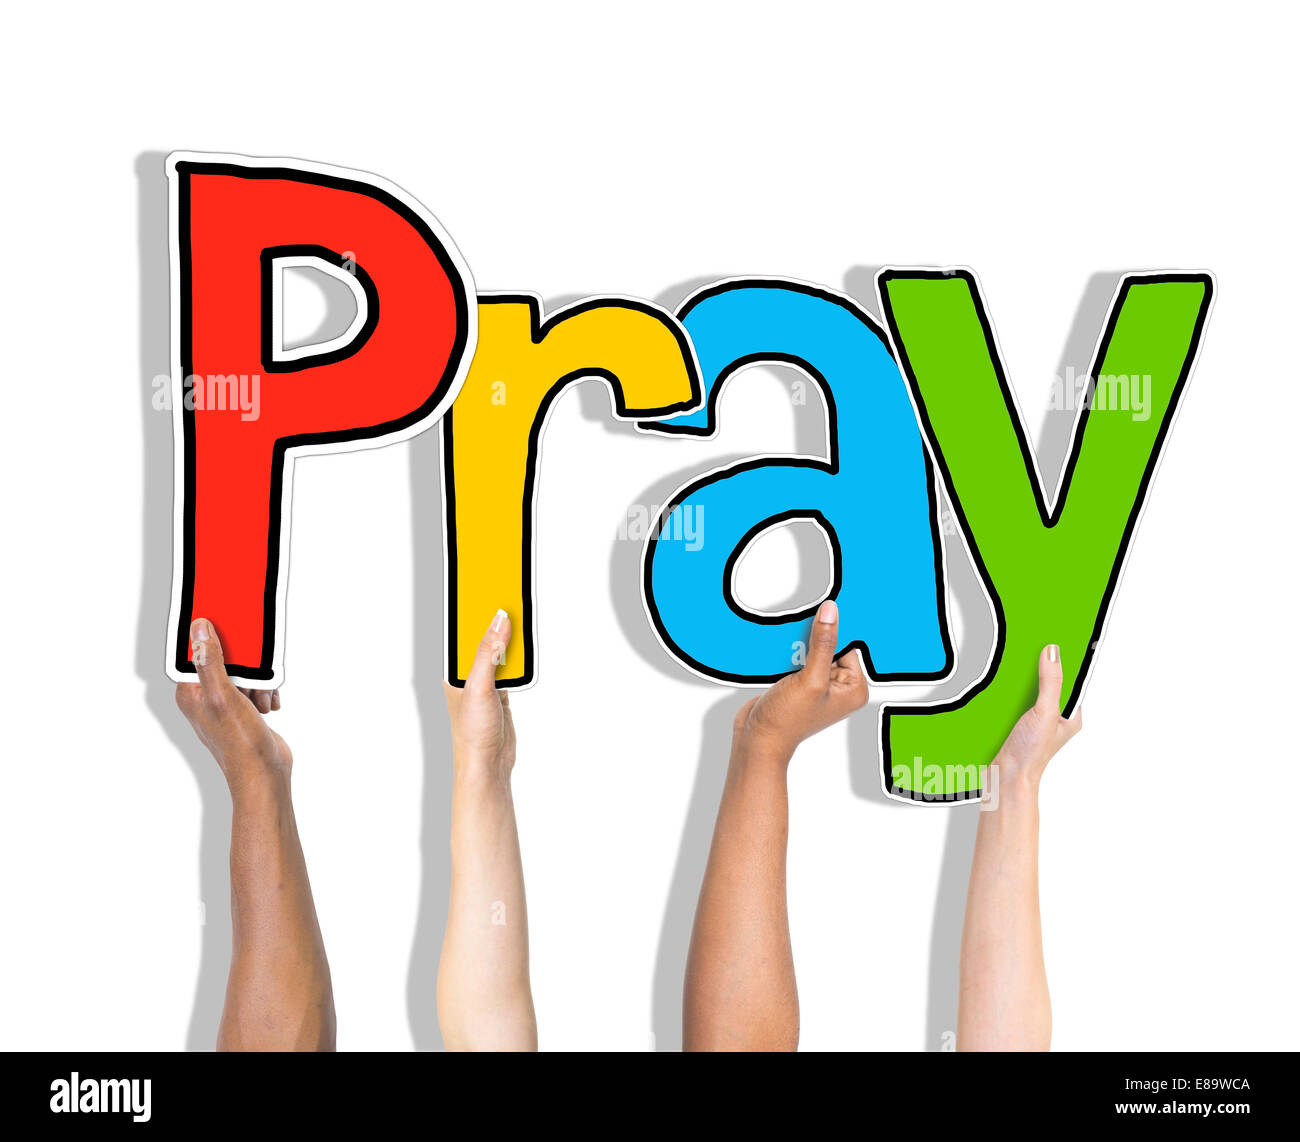 Pray Word Concepts Isolated on Background Stock Photo